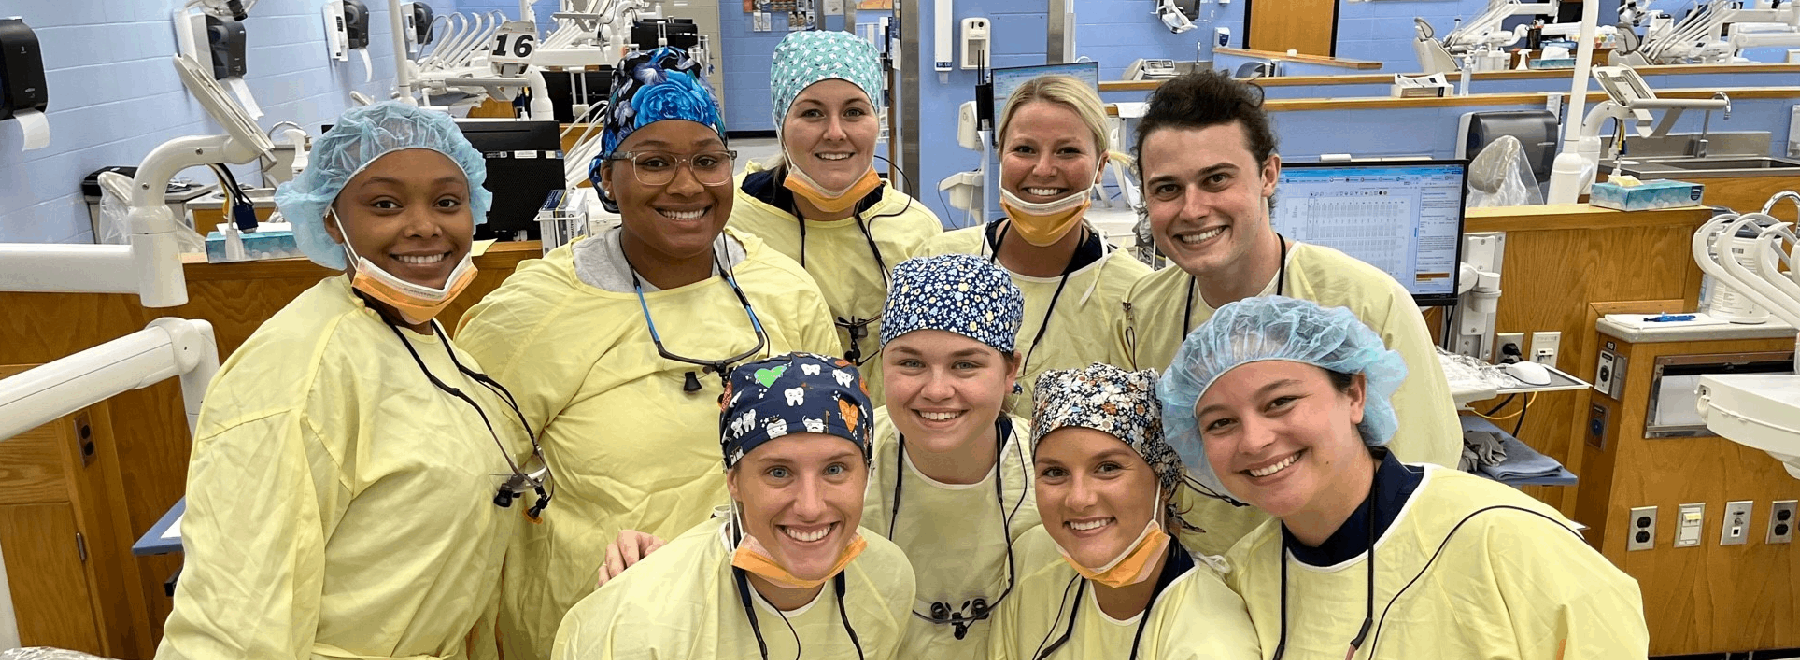 Group of smiling dental hygiene students in the lab